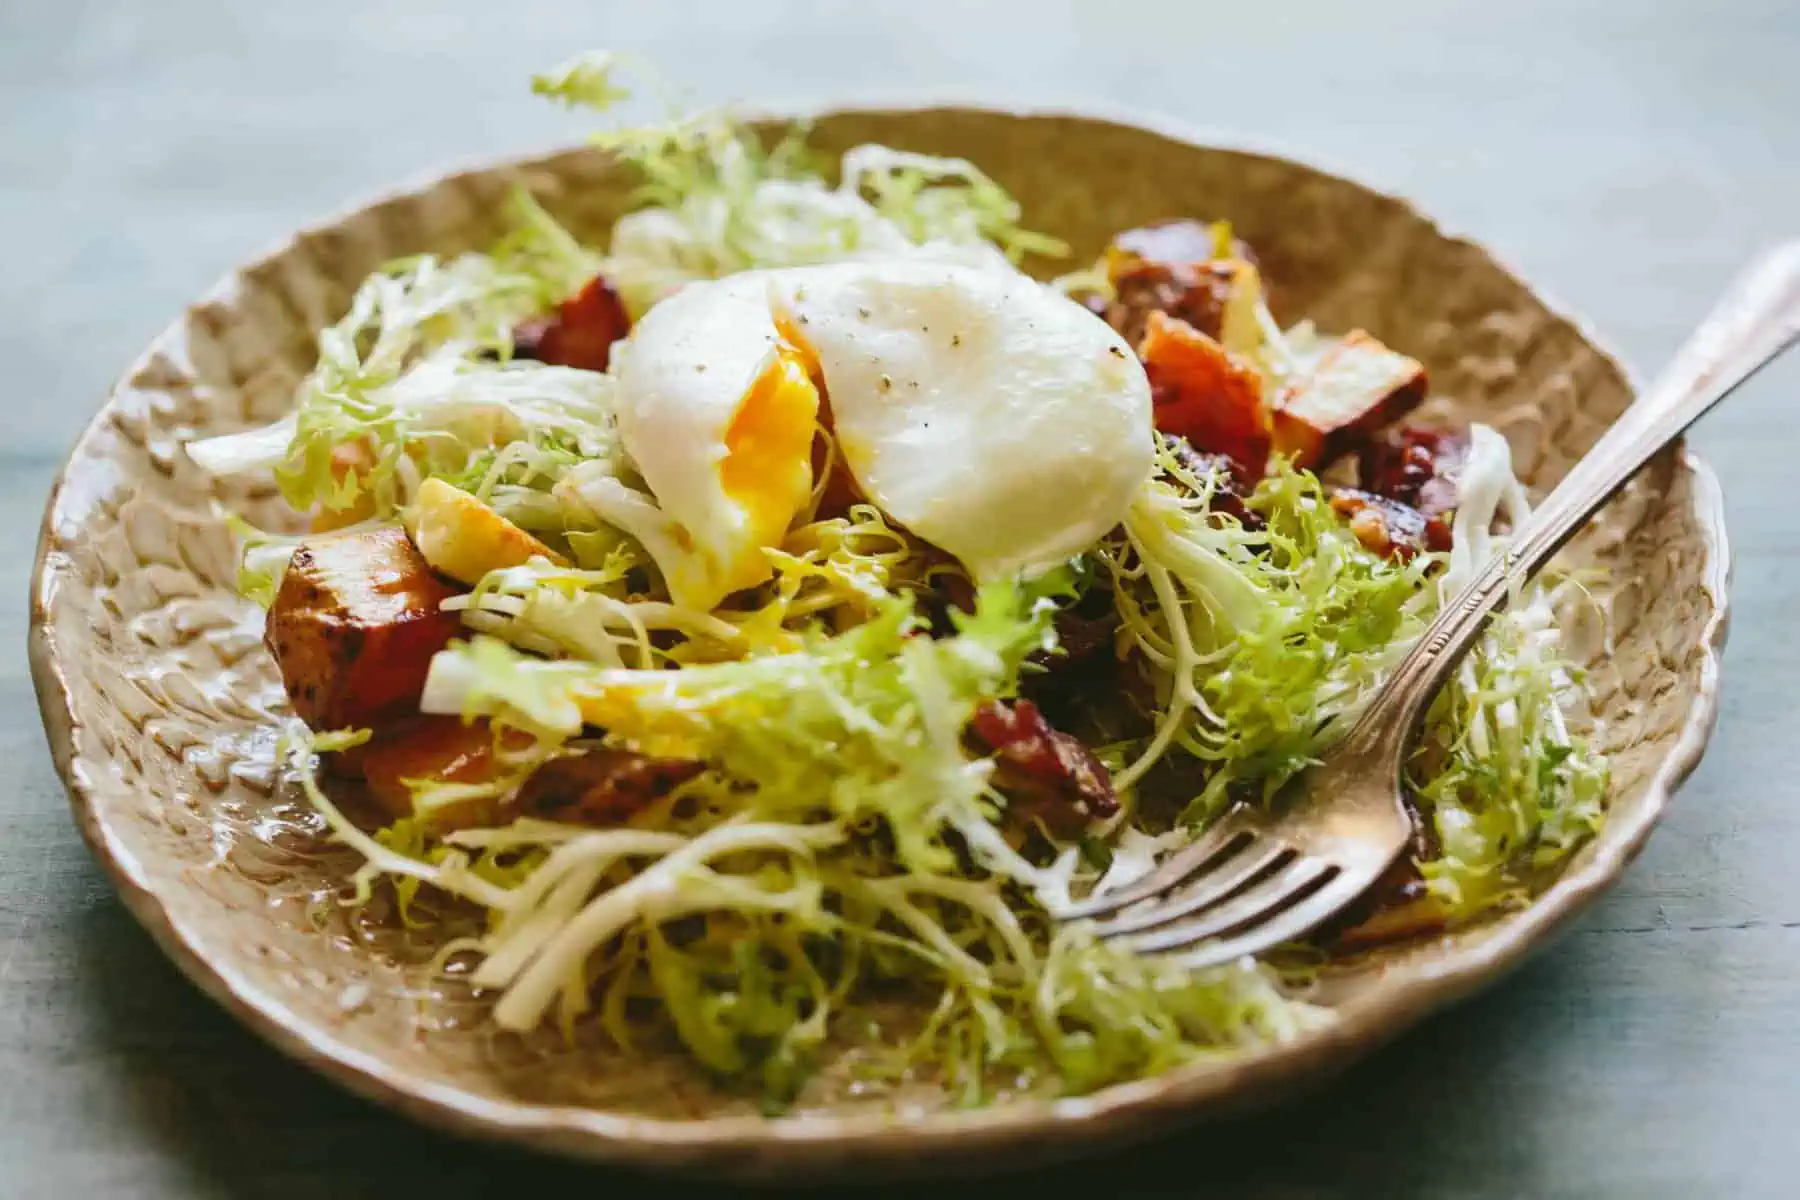 Tan luncheon plate with lyonnaise salad and poached egg on top.